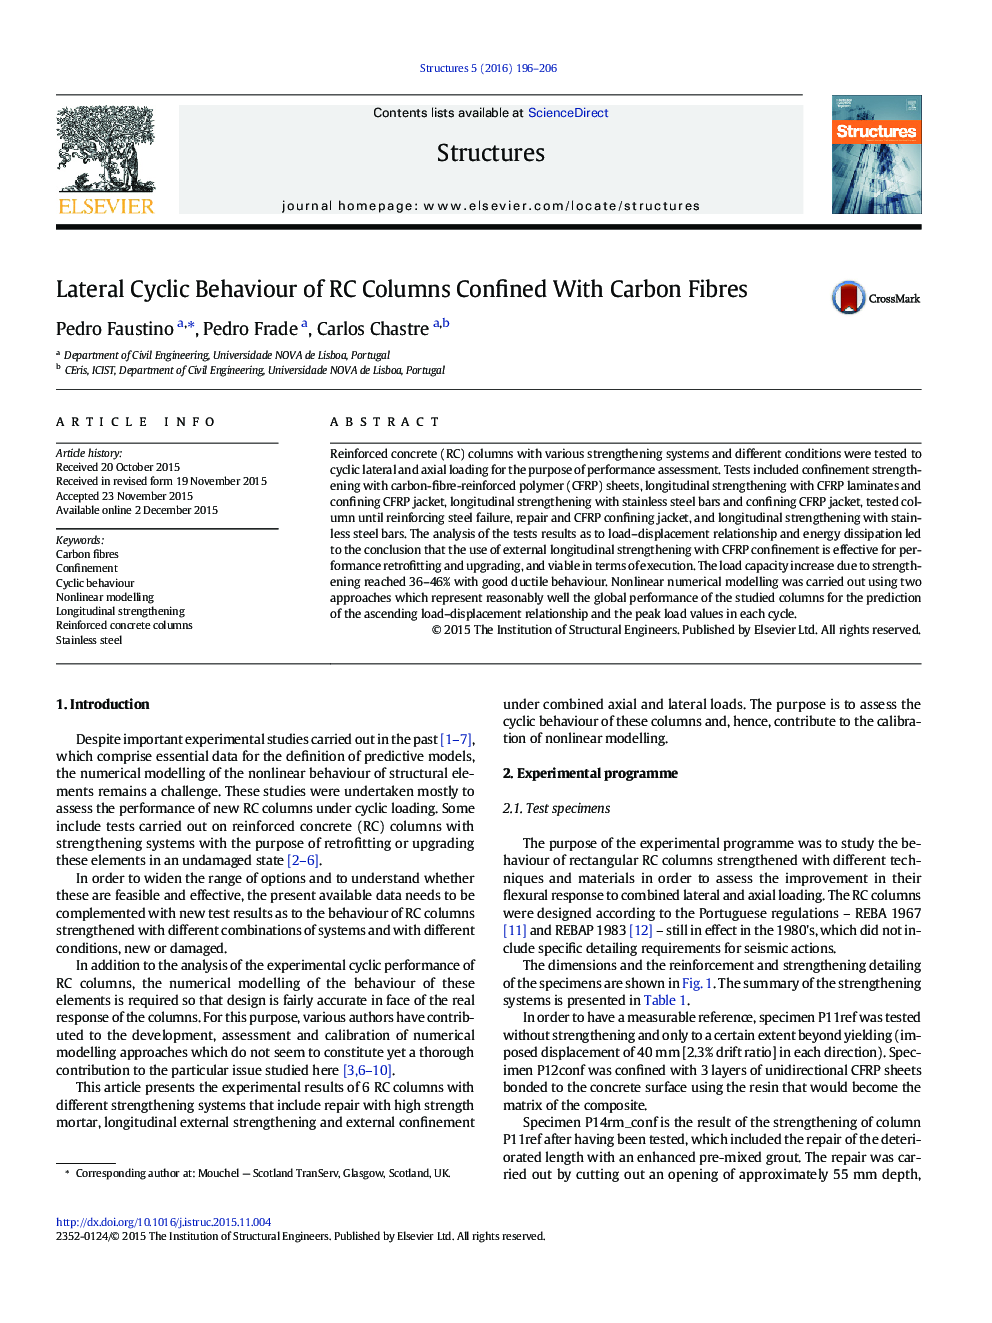 Lateral Cyclic Behaviour of RC Columns Confined With Carbon Fibres